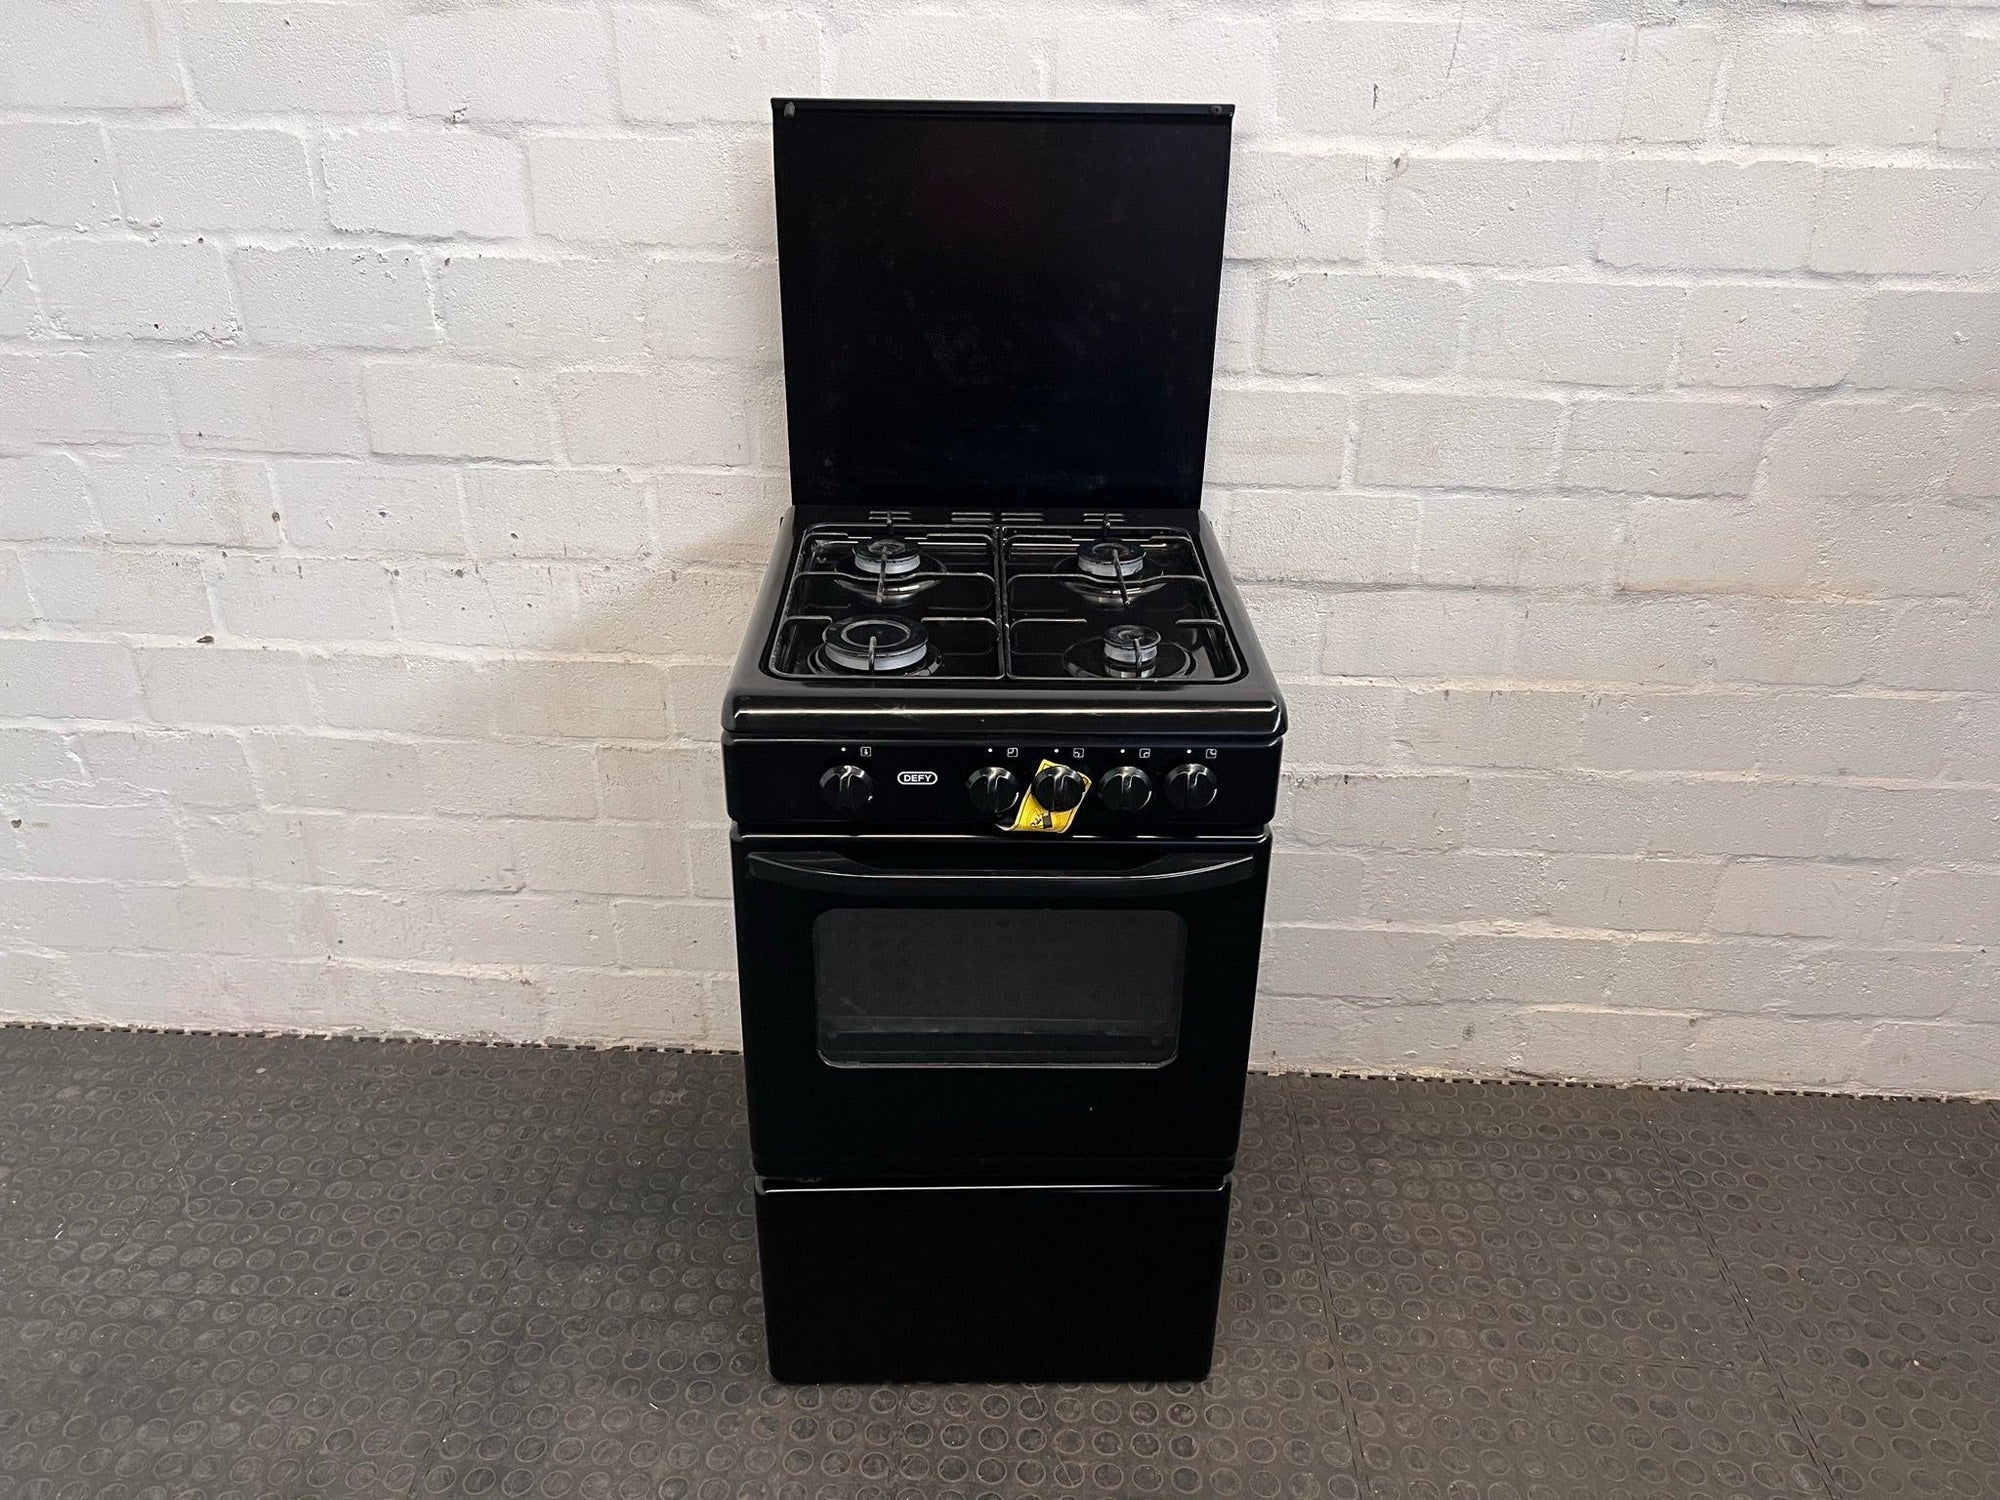 DEFY 4 Plate Gas Stove (No Gas Cylinder) - REDUCED